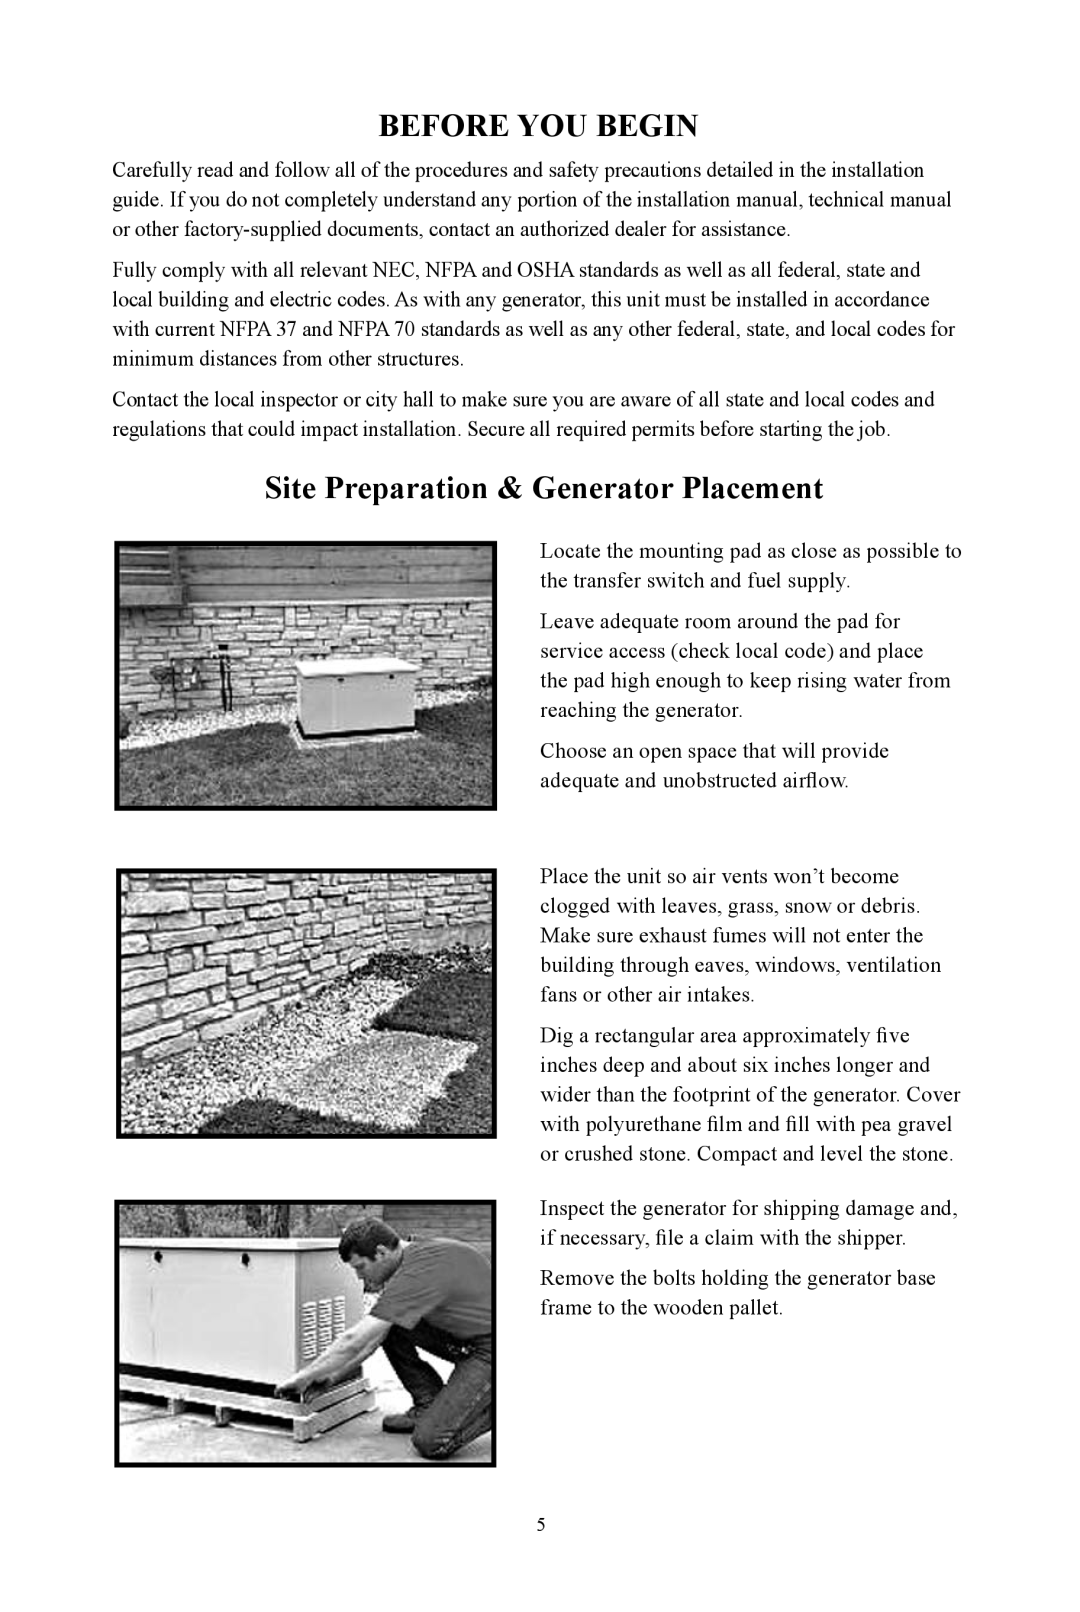 Generac Power Systems OG 2697 manual Before You Begin, Site Preparation & Generator Placement 